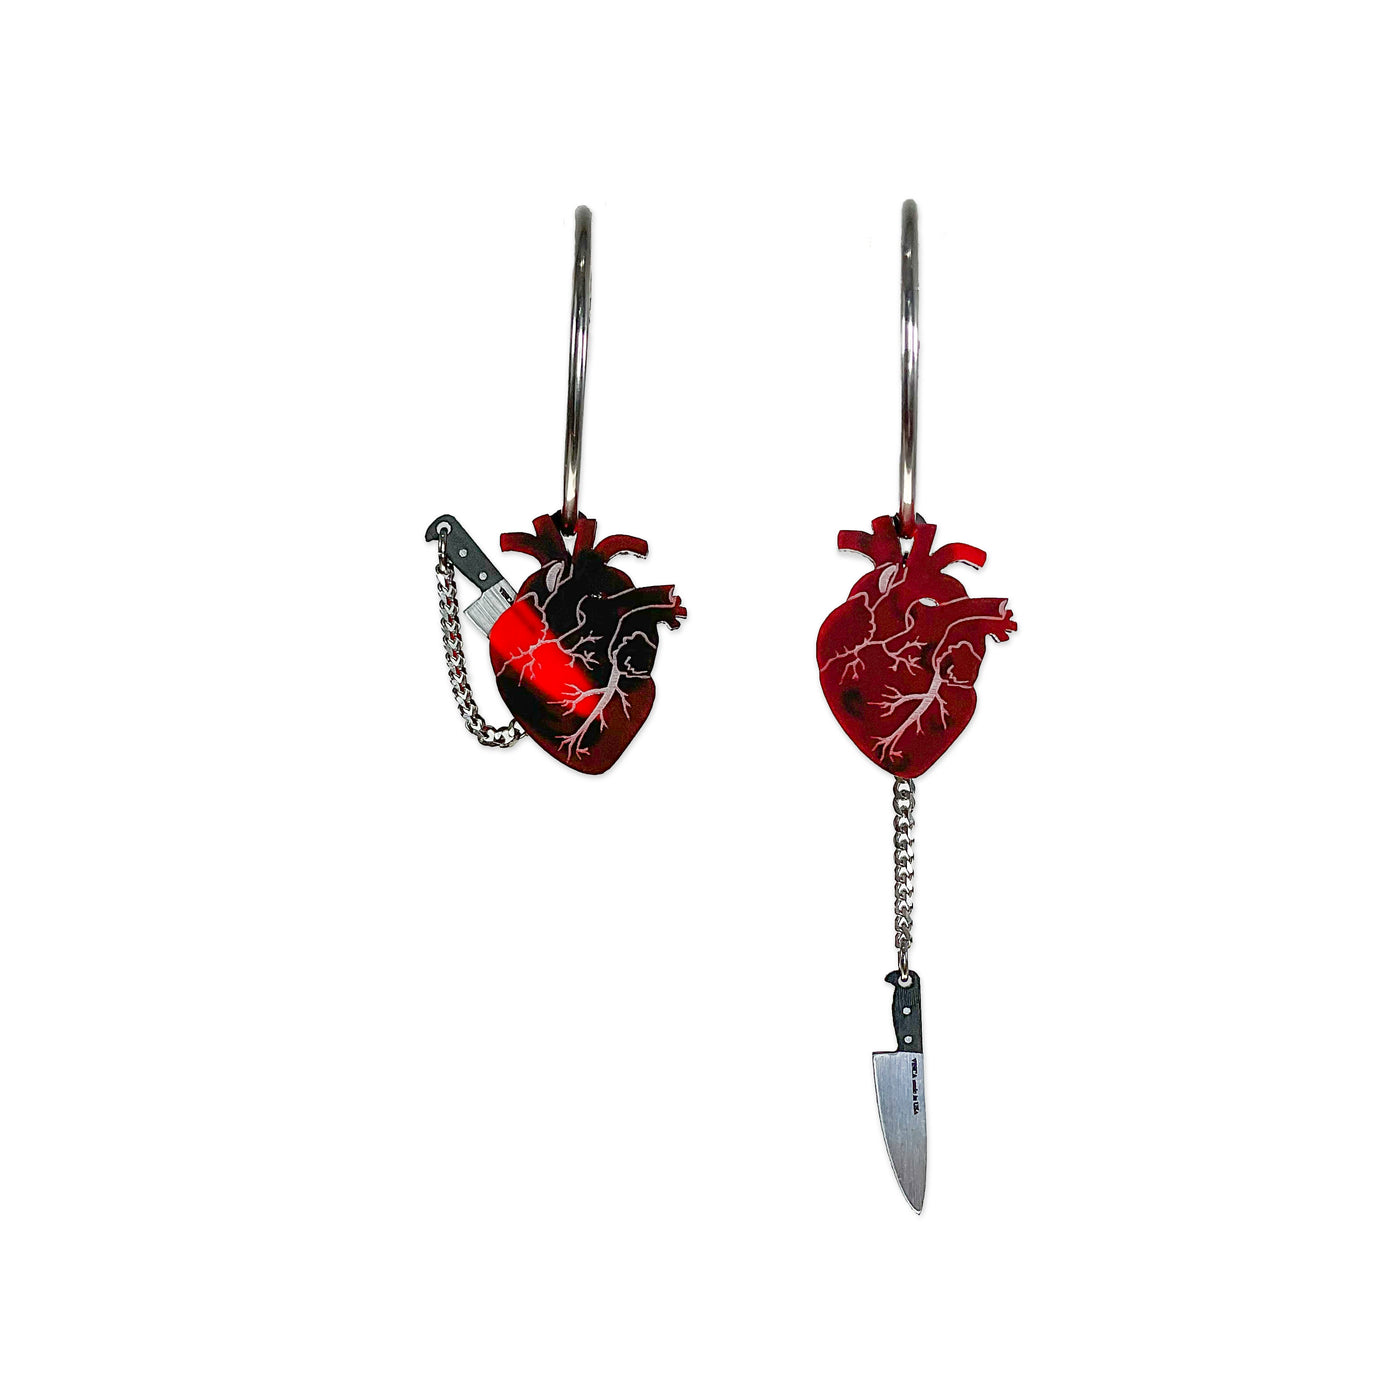 Chopped Heart Hoops Red/Silver/Black